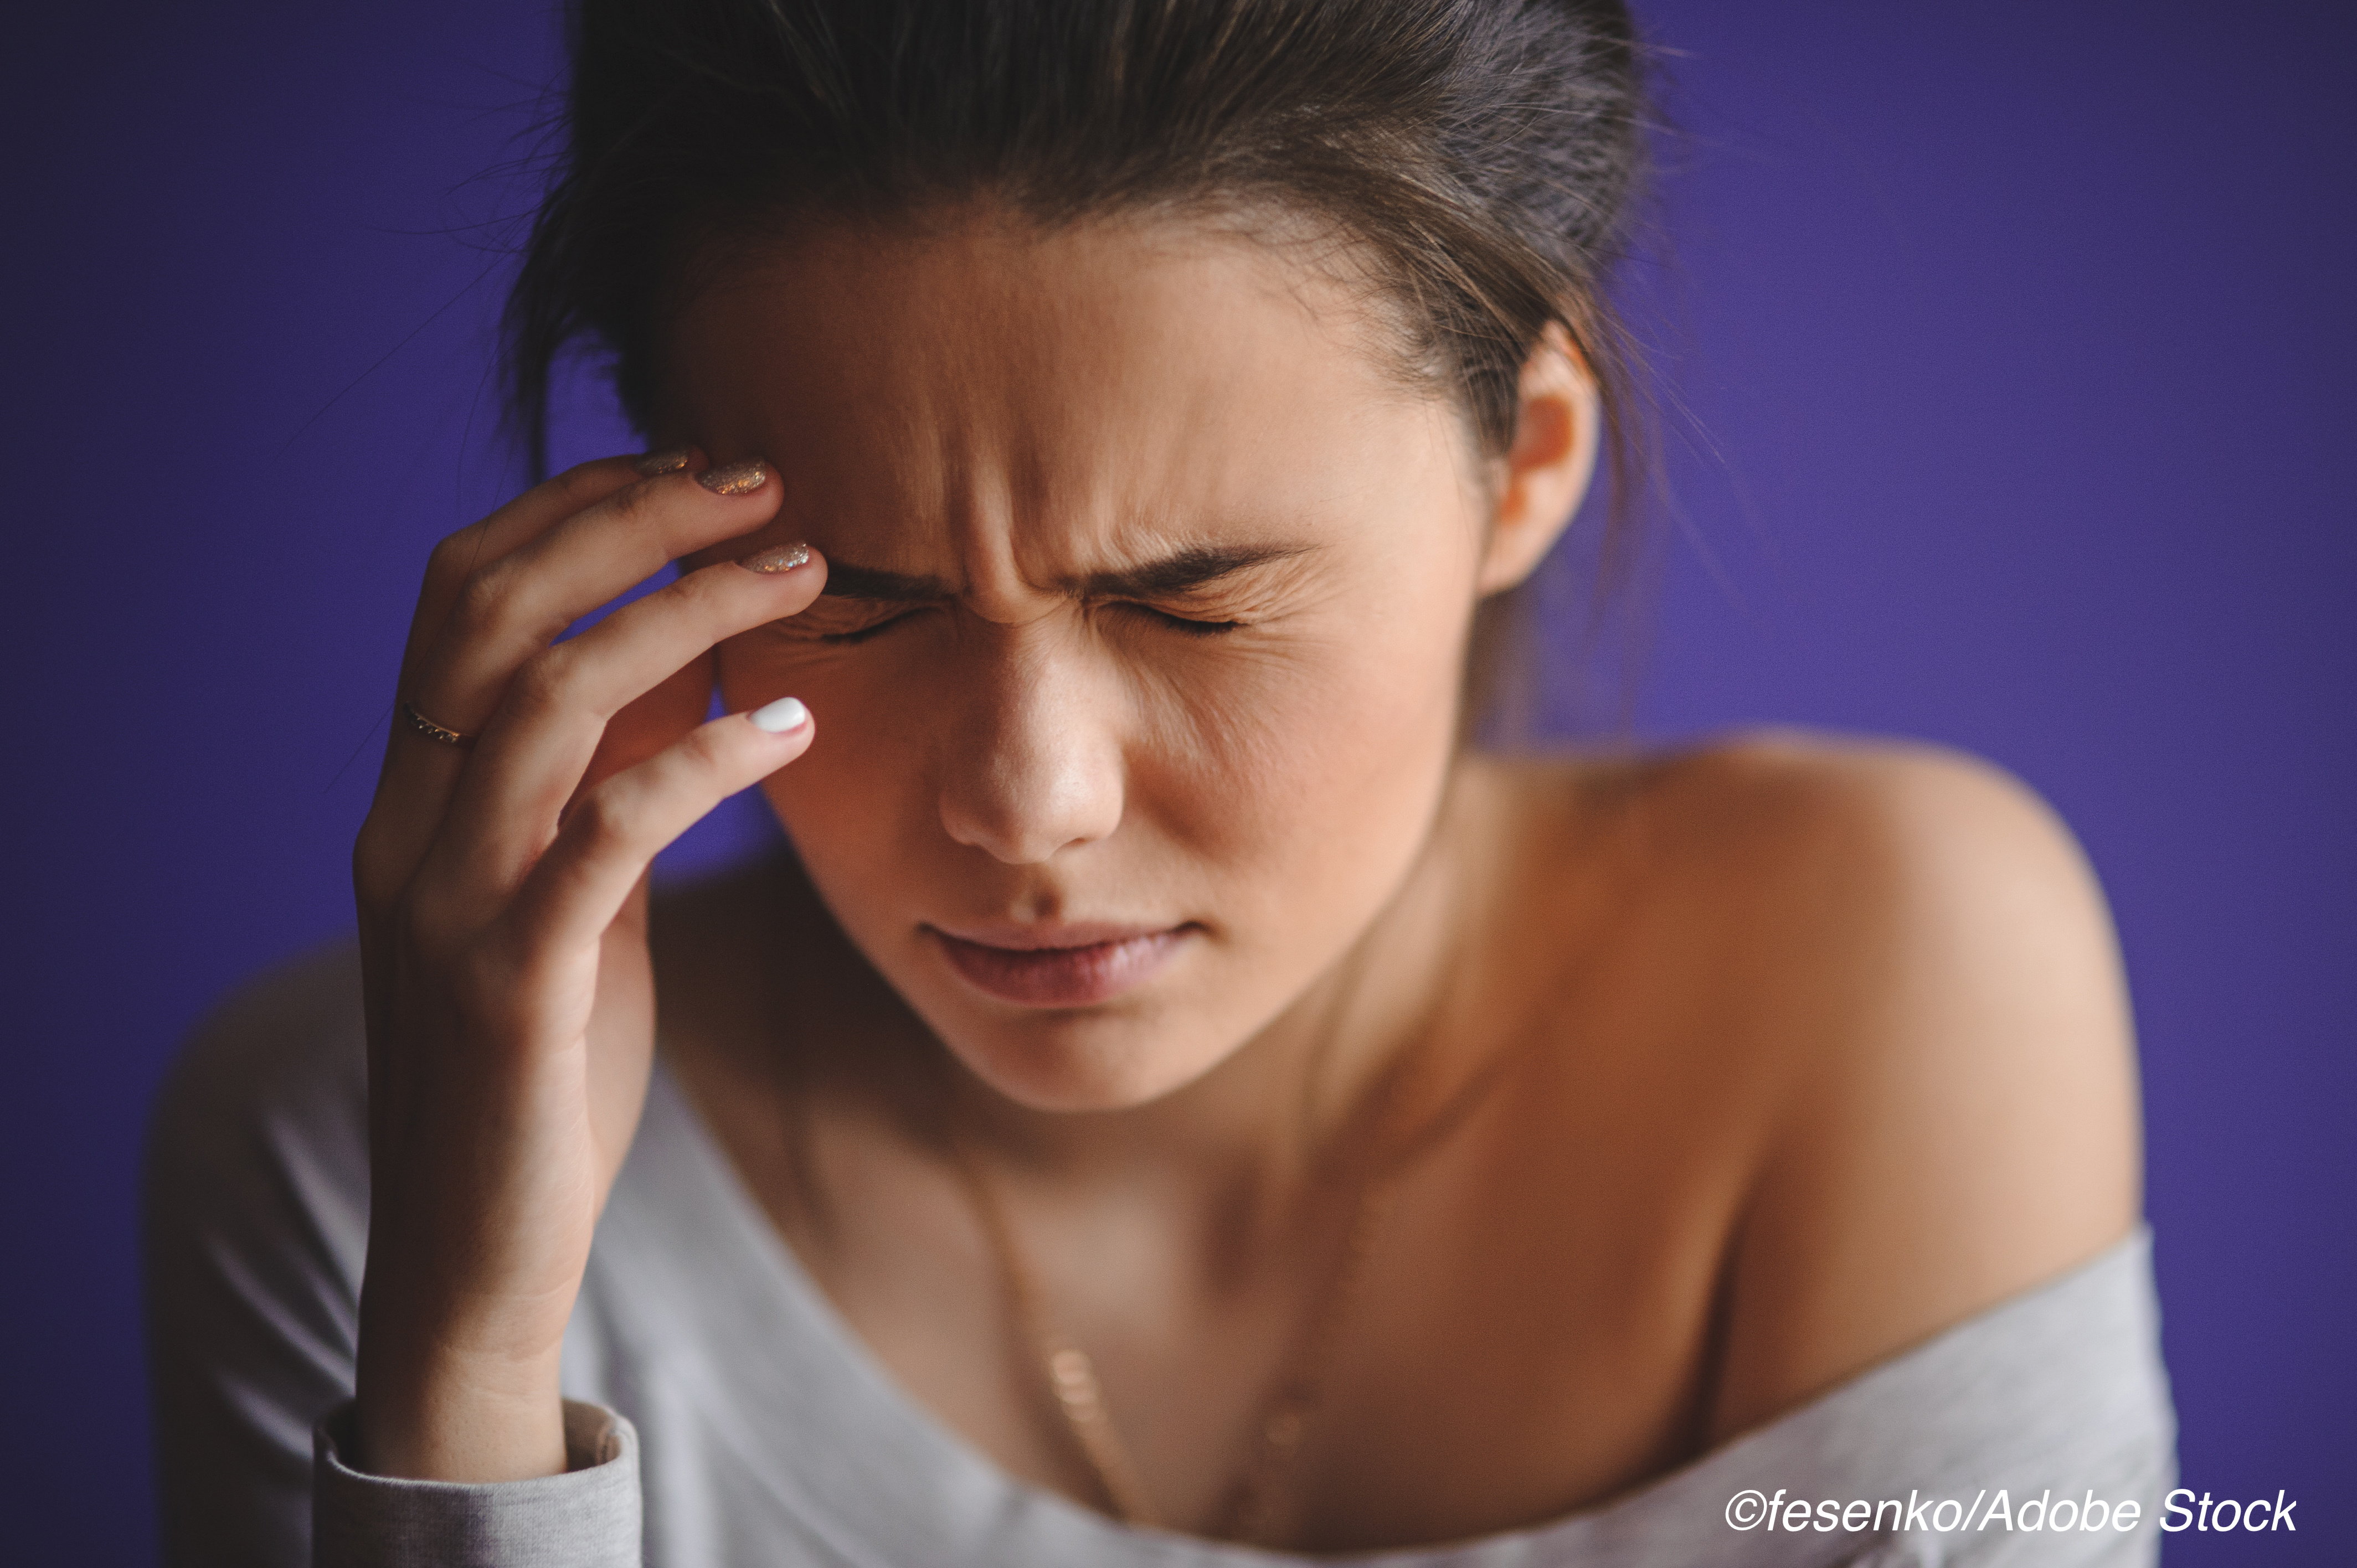 Atogepant Reduces Monthly Migraine Days